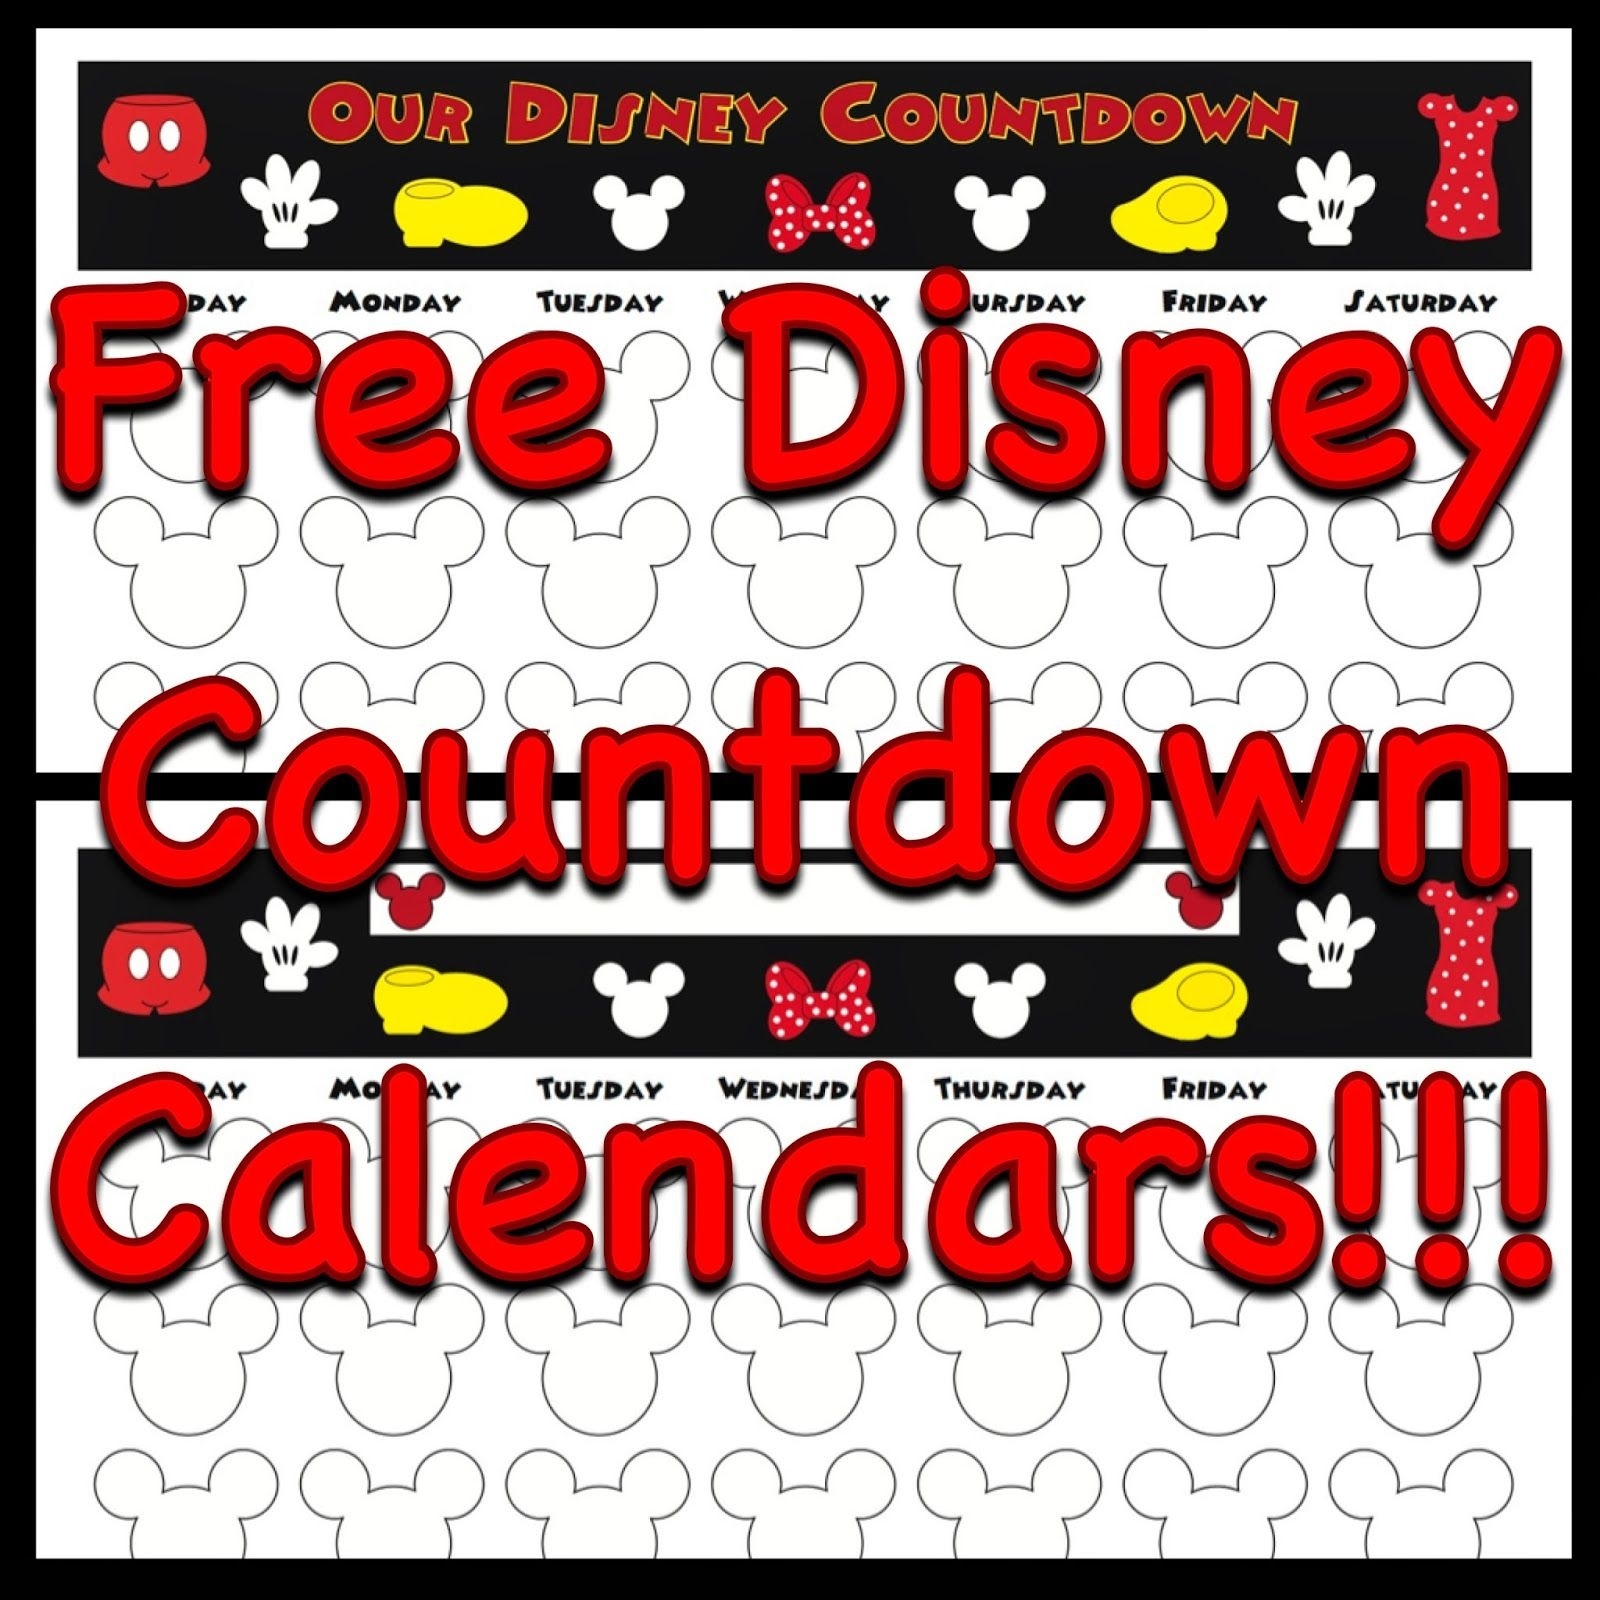 Free, Printable Countdown Calendars To Use For Your Next Free Printable Disneyland Countdown Calendar 2020